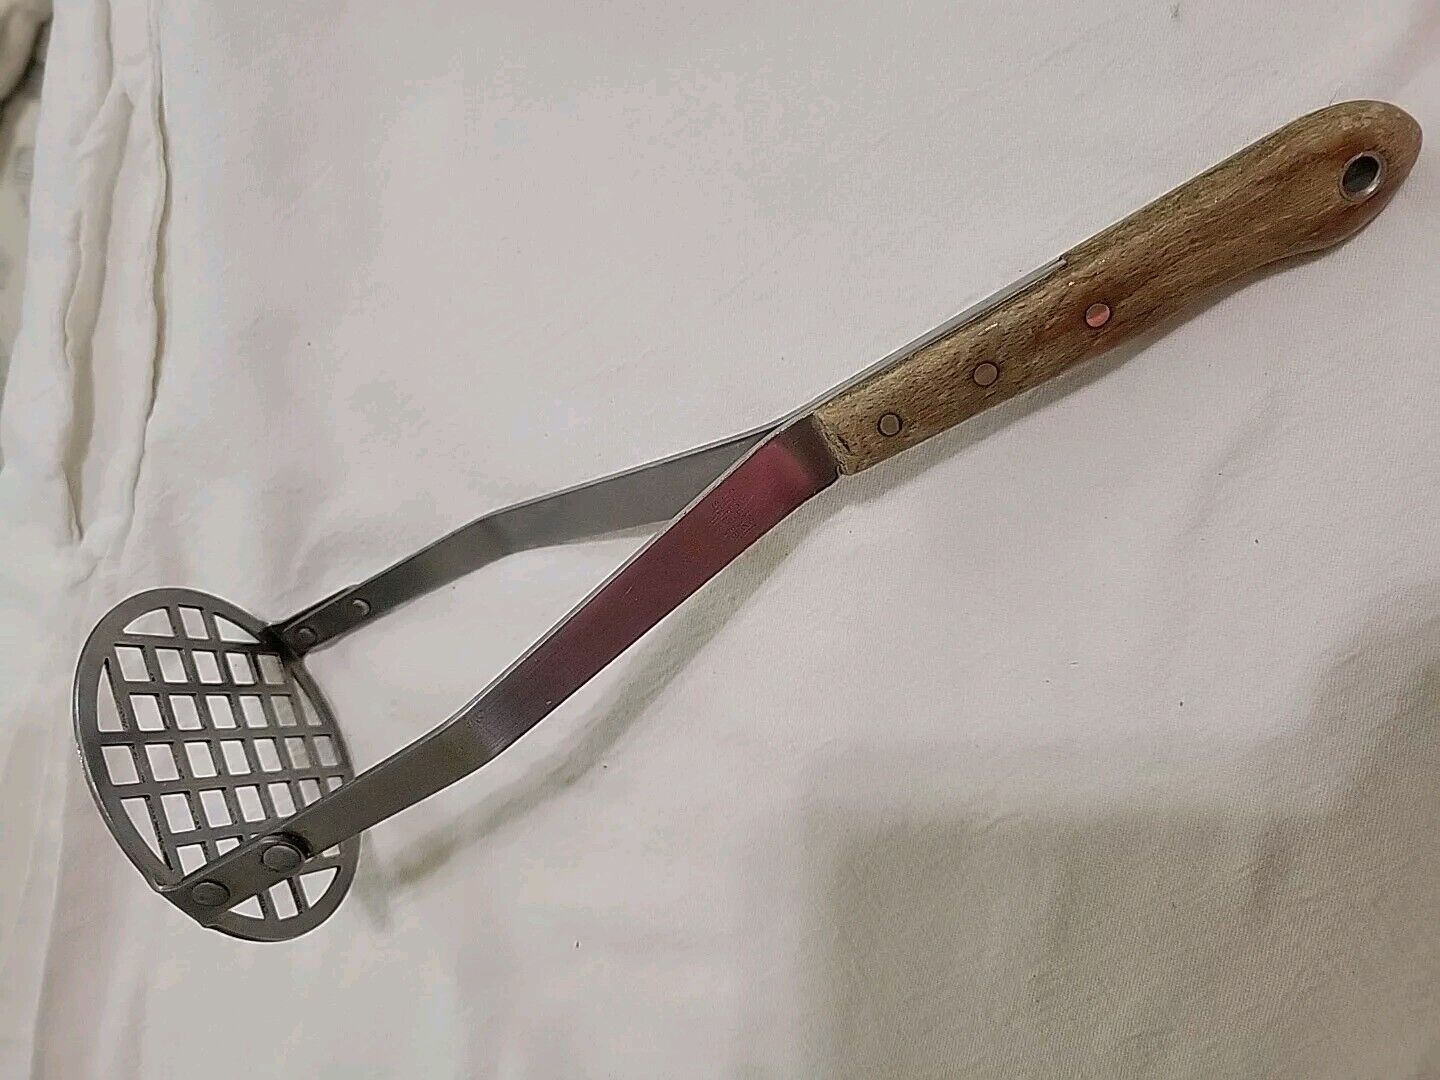 Vintage IMPERIAL POTATO MASHER Wood Handle STAINLESS STEEL MADE USA hard to find